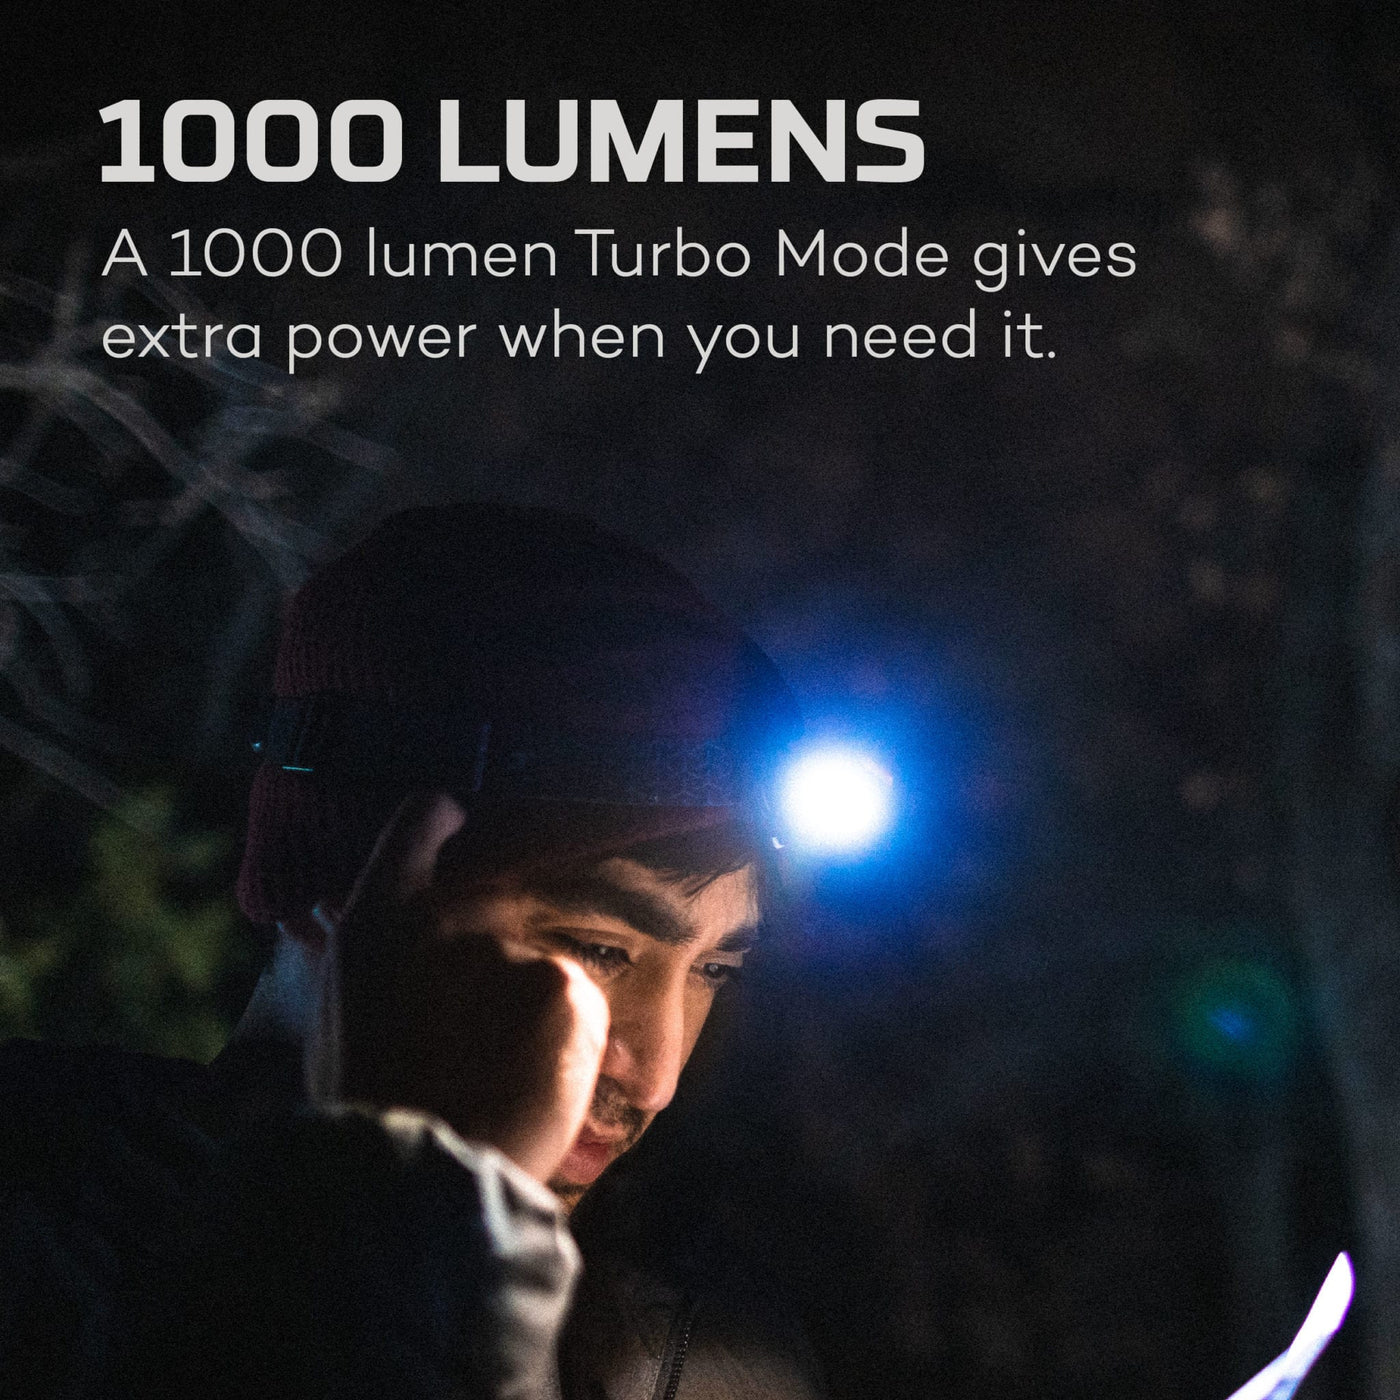 At Nebo Tools, we continually innovate so that we can offer the highest quality LED lighting products at the best price. The Einstein™ 1000 by NEBO is a low-profile, compact 1,000 lumen headtorch with 5 light modes featuring flex power. Use the included rechargeable battery or 2 batteries. Completely water resistant